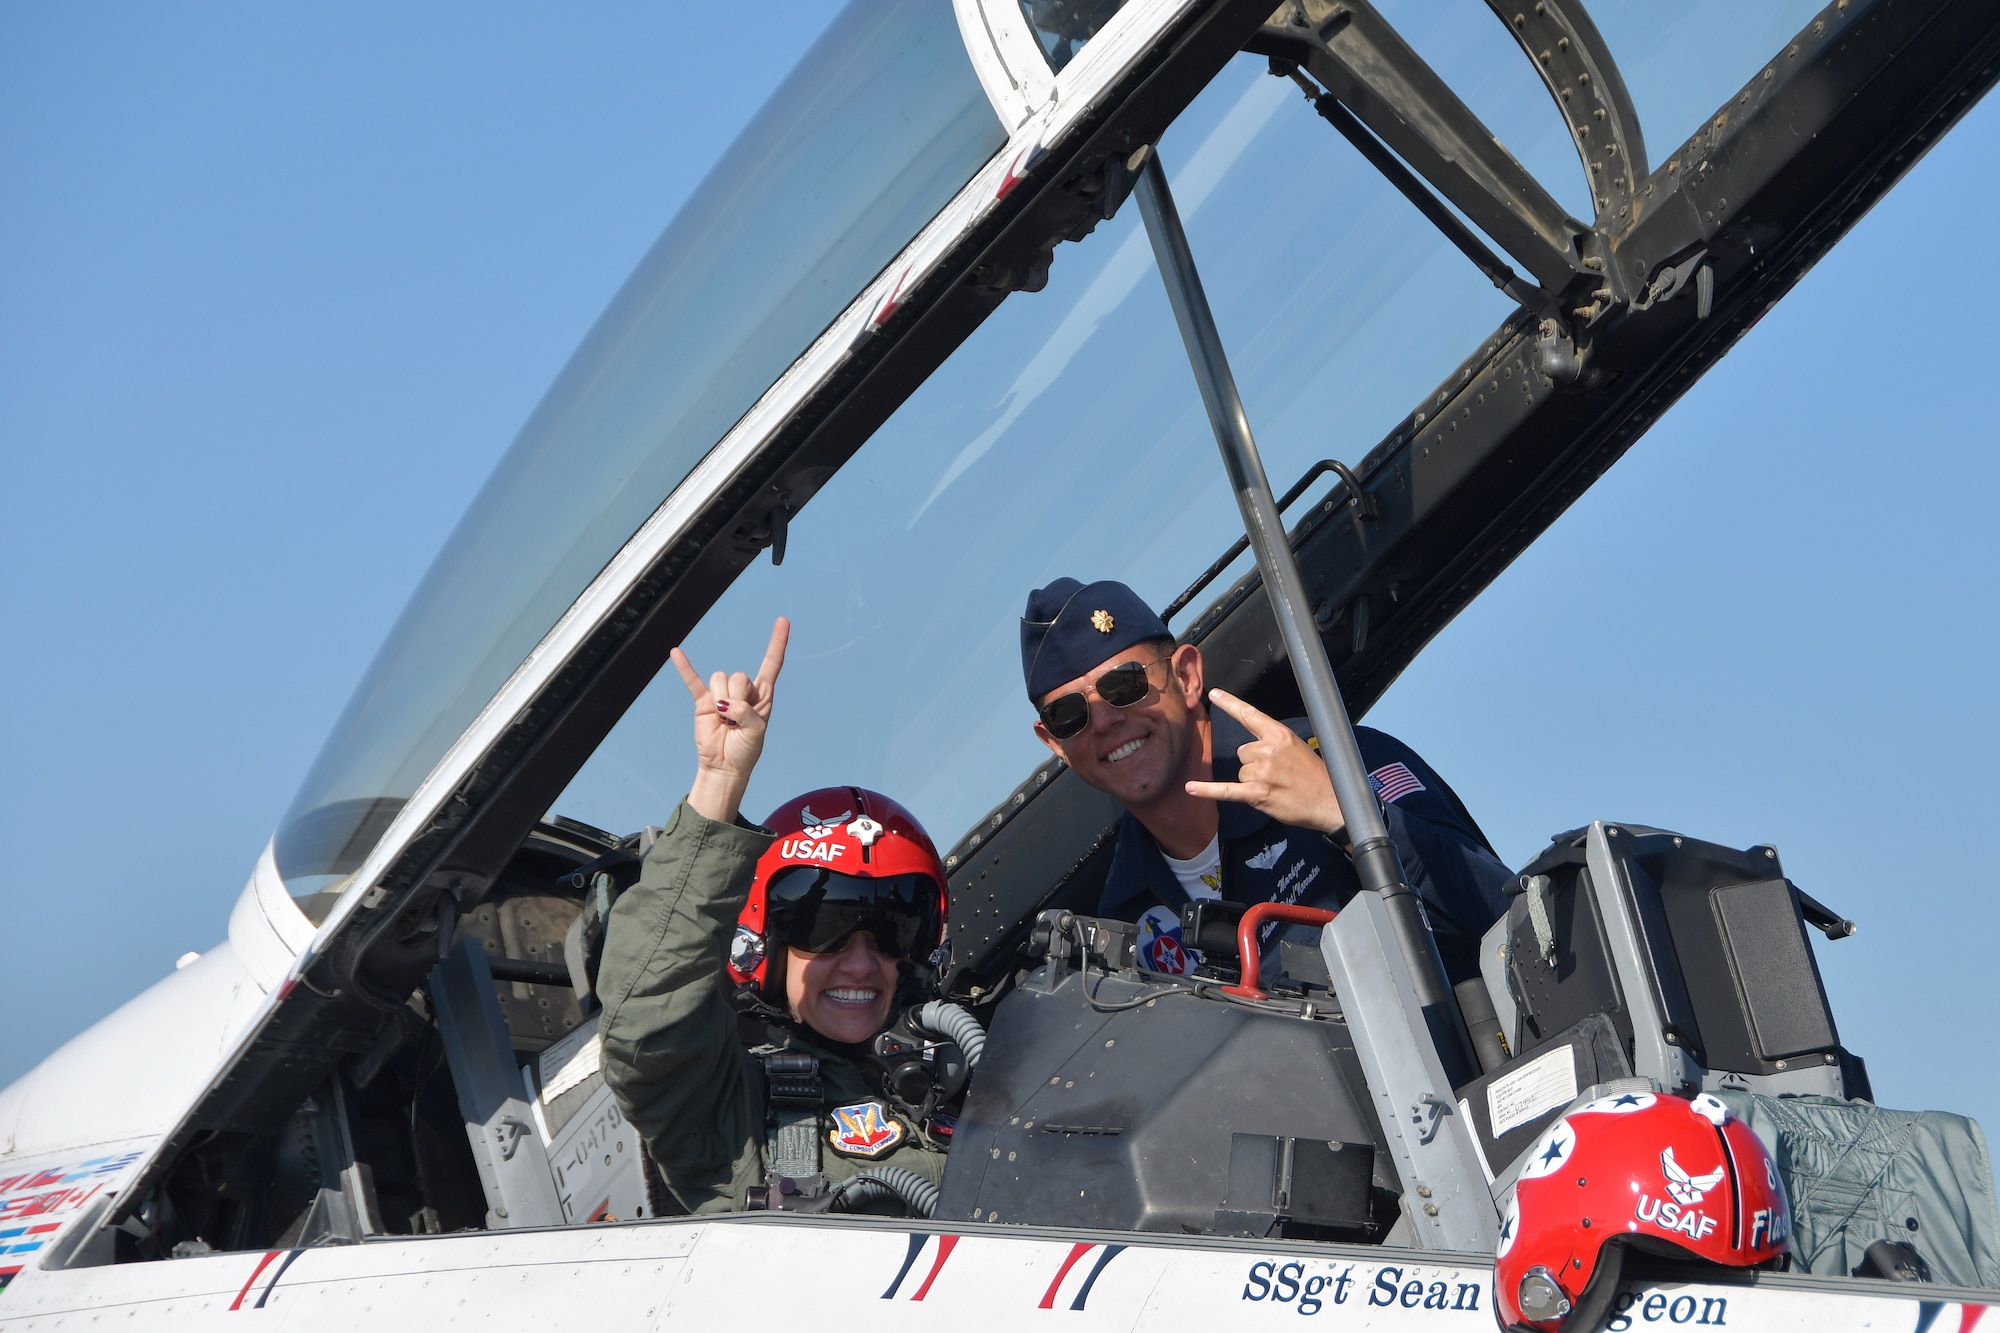 Tracey Pendley, an Atlanta Public Schools fourth grade teacher, left, and Maj. Jason Markzon, Thunderbirds advance pilot and narrator, pose for a photo shortly before takeoff at Dobbins Air Reserve Base, Ga. on Oct. 11, 2019. Tracey Pendley, this year's Georgia Teacher of the Year and Hometown Hero, flew with the Thunderbirds. (U.S. Air Force photo/Airman Kendra A. Ransum)